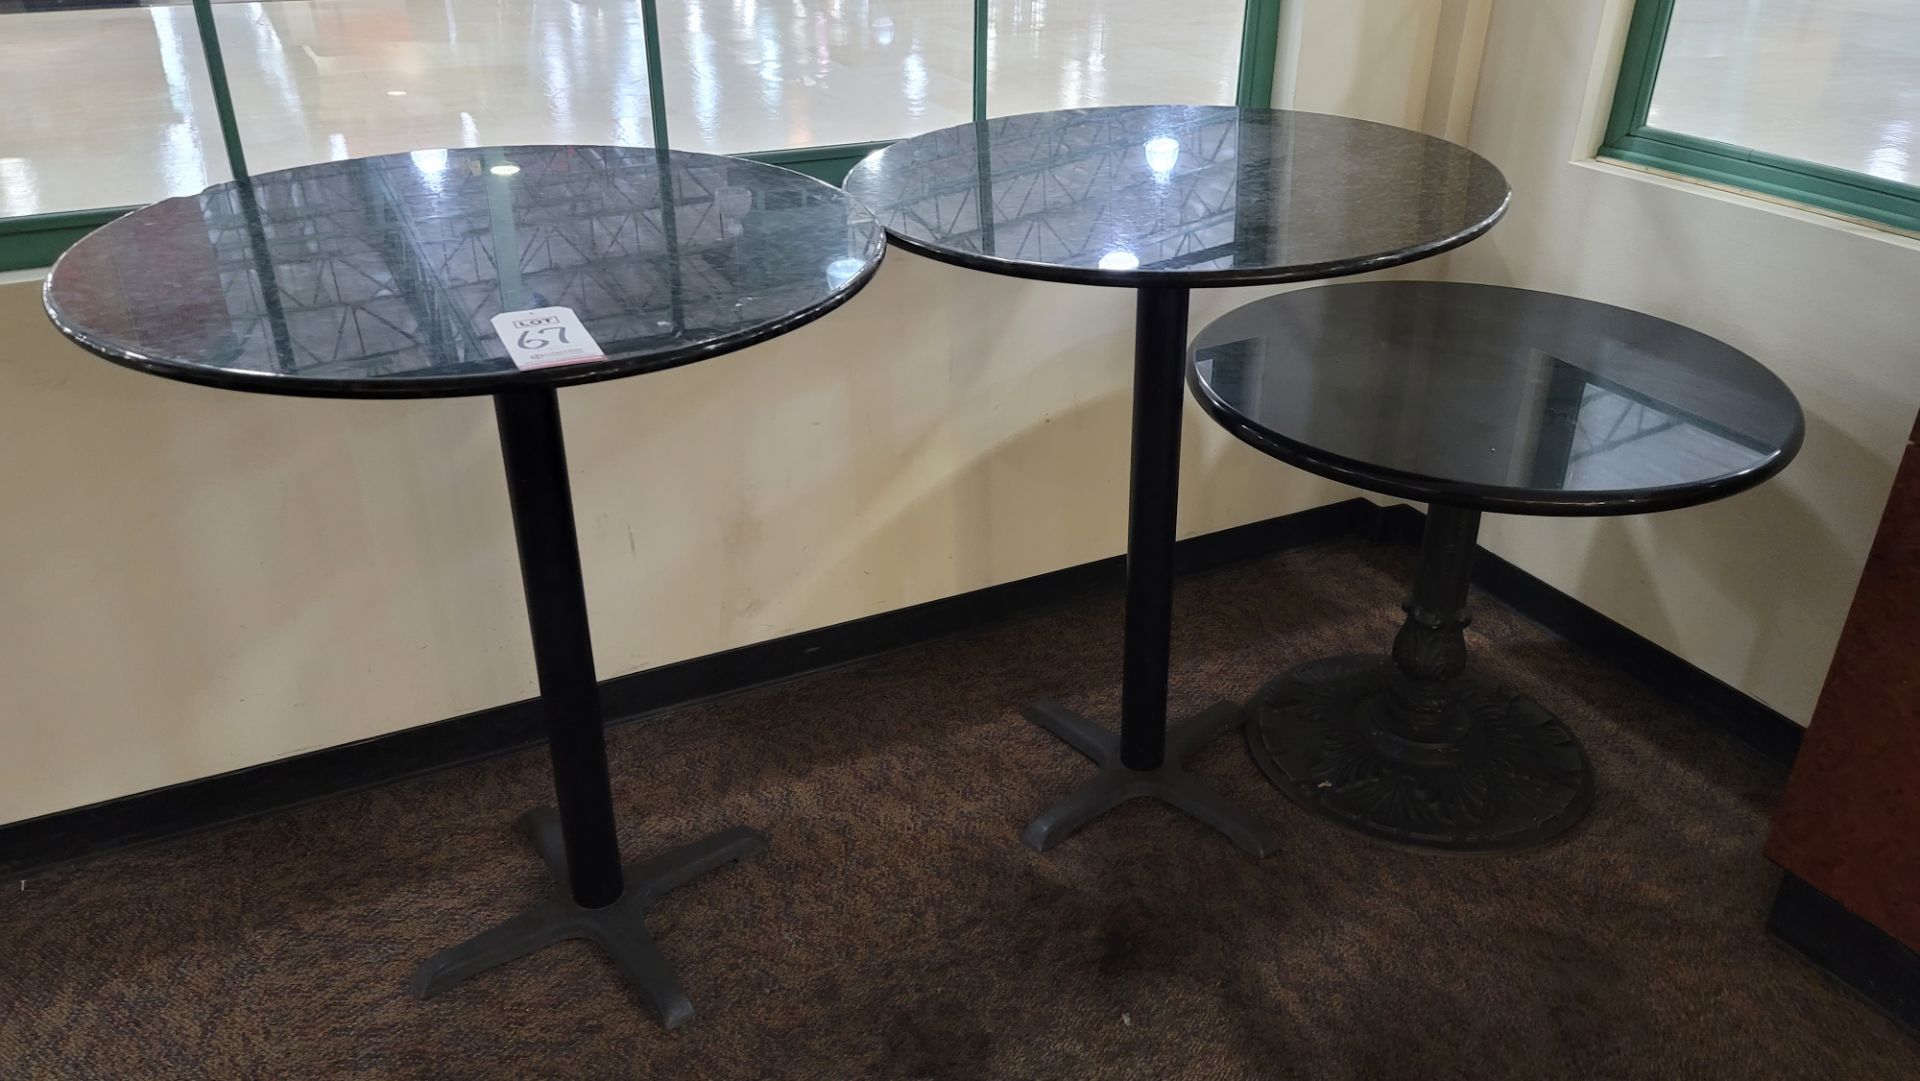 LOT - (3) LUNCH TABLES, 3' DIA ROUND TOPS